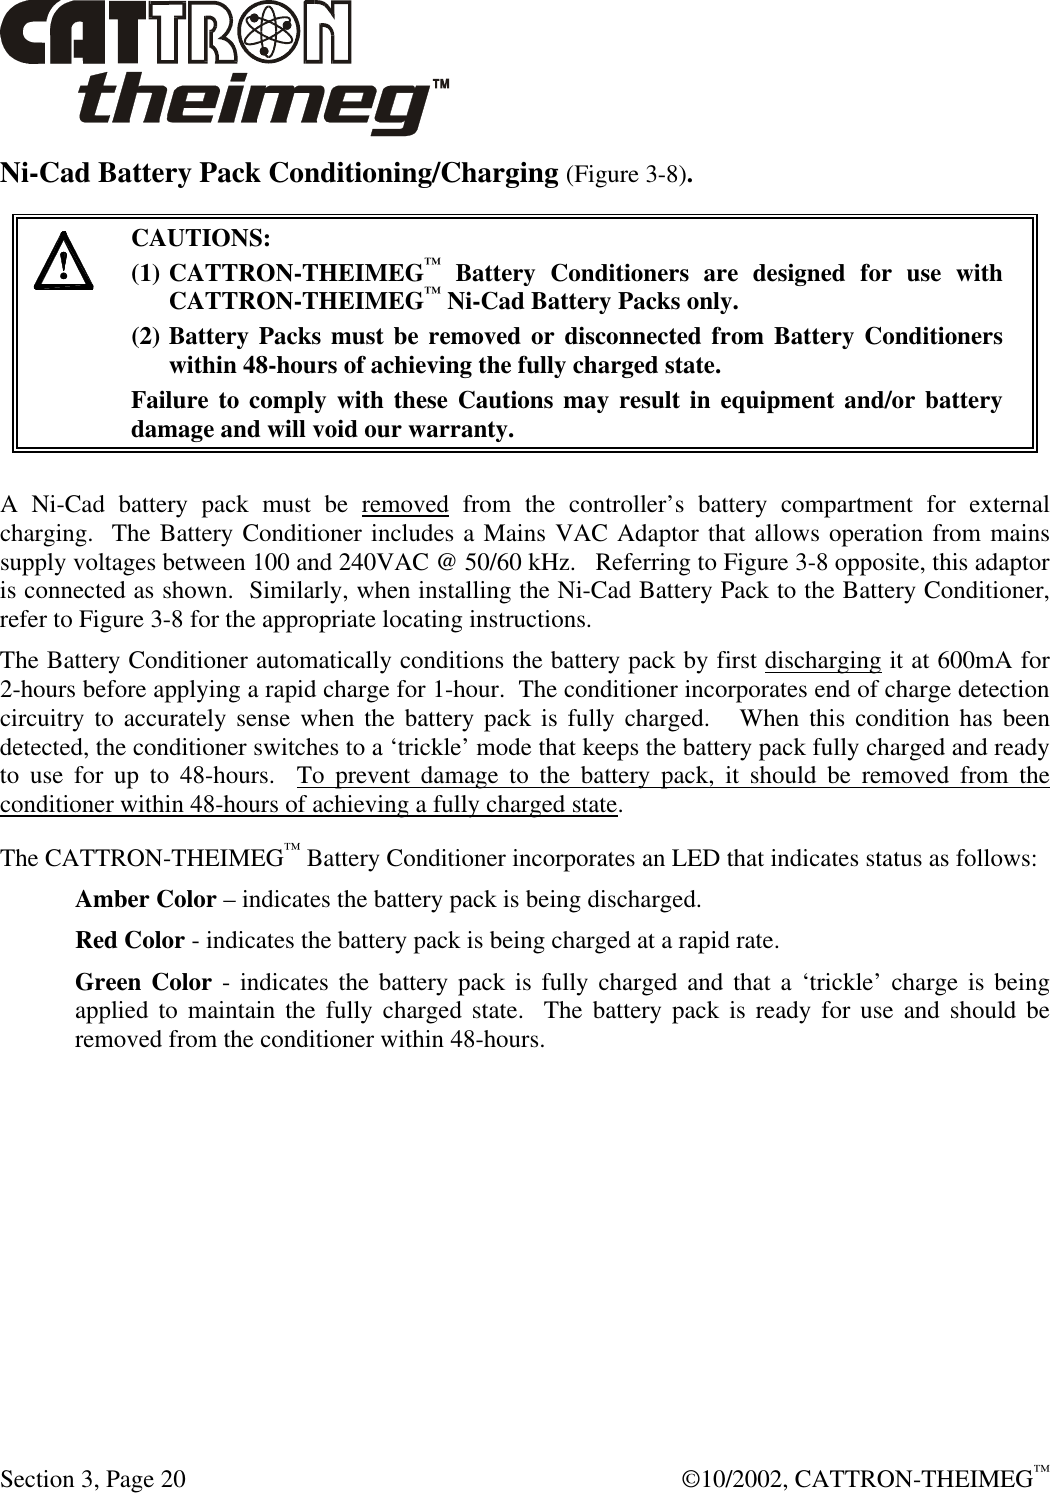  Section 3, Page 20  ©10/2002, CATTRON-THEIMEG™ Ni-Cad Battery Pack Conditioning/Charging (Figure 3-8).   CAUTIONS: (1) CATTRON-THEIMEG™ Battery Conditioners are designed for use with CATTRON-THEIMEG™ Ni-Cad Battery Packs only.   (2) Battery Packs must be removed or disconnected from Battery Conditioners within 48-hours of achieving the fully charged state.   Failure to comply with these Cautions may result in equipment and/or battery damage and will void our warranty.   A Ni-Cad battery pack must be removed from the controller’s battery compartment for external charging.  The Battery Conditioner includes a Mains VAC Adaptor that allows operation from mains supply voltages between 100 and 240VAC @ 50/60 kHz.   Referring to Figure 3-8 opposite, this adaptor is connected as shown.  Similarly, when installing the Ni-Cad Battery Pack to the Battery Conditioner, refer to Figure 3-8 for the appropriate locating instructions.  The Battery Conditioner automatically conditions the battery pack by first discharging it at 600mA for 2-hours before applying a rapid charge for 1-hour.  The conditioner incorporates end of charge detection circuitry to accurately sense when the battery pack is fully charged.   When this condition has been detected, the conditioner switches to a ‘trickle’ mode that keeps the battery pack fully charged and ready to use for up to 48-hours.  To prevent damage to the battery pack, it should be removed from the conditioner within 48-hours of achieving a fully charged state. The CATTRON-THEIMEG™ Battery Conditioner incorporates an LED that indicates status as follows: Amber Color – indicates the battery pack is being discharged. Red Color - indicates the battery pack is being charged at a rapid rate. Green Color - indicates the battery pack is fully charged and that a ‘trickle’ charge is being applied to maintain the fully charged state.  The battery pack is ready for use and should be removed from the conditioner within 48-hours. 